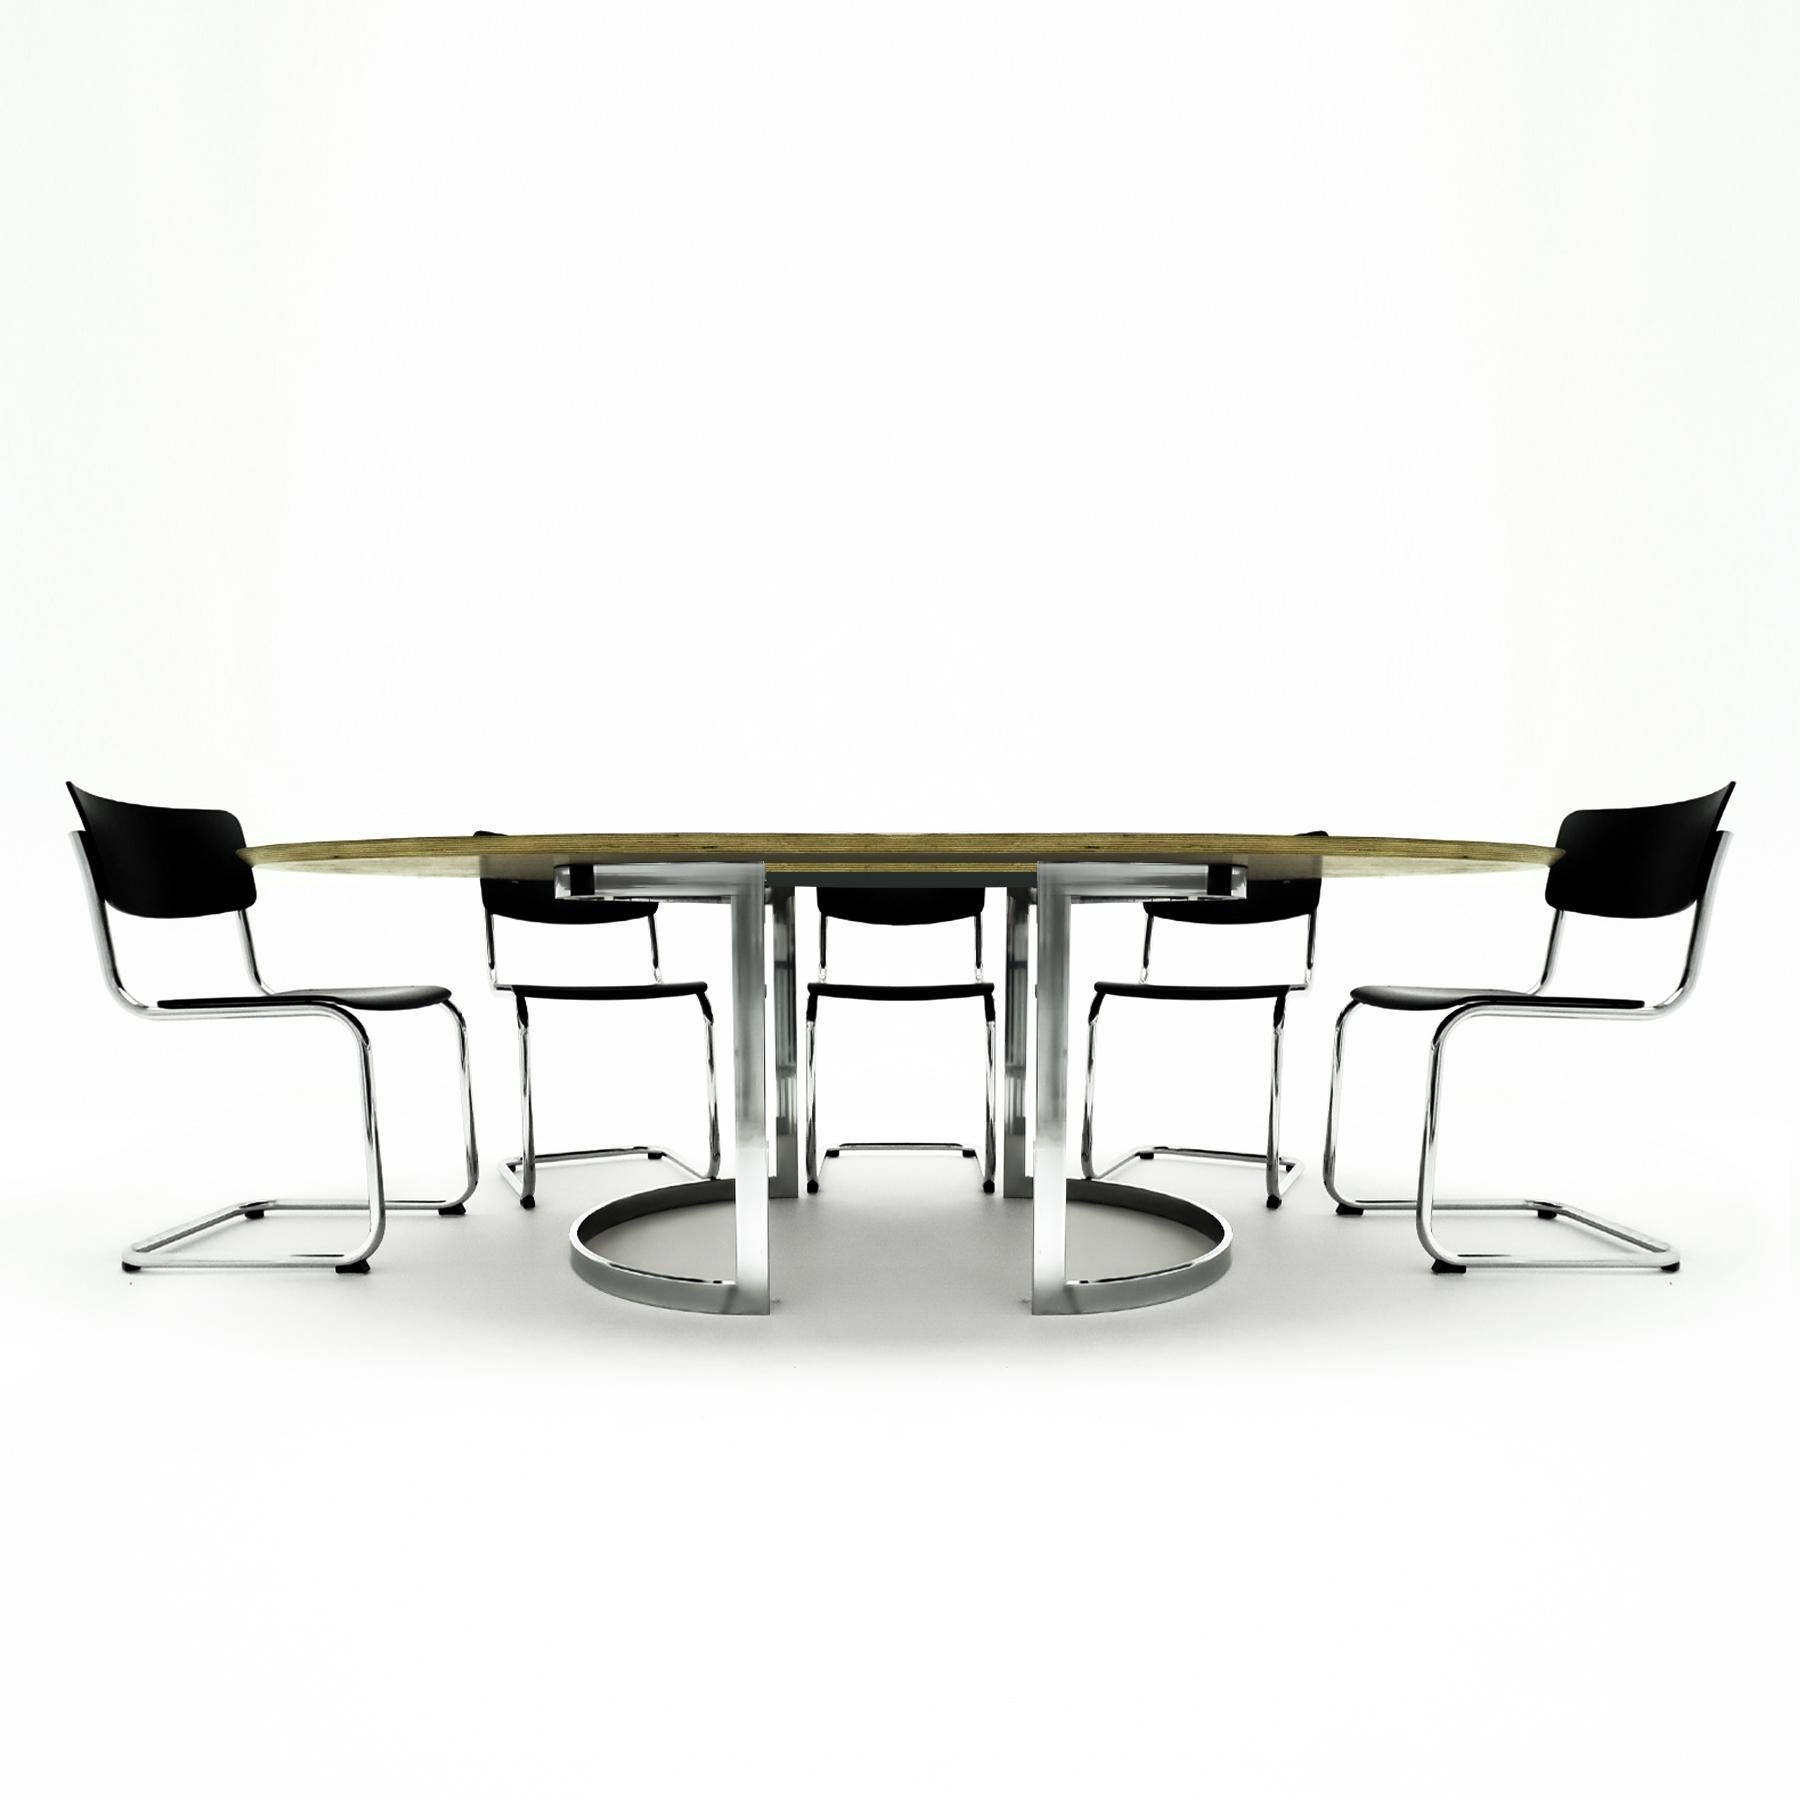 8 Mart Stam Thonet S43 chairs matched to a large Milo Baughman style table   1